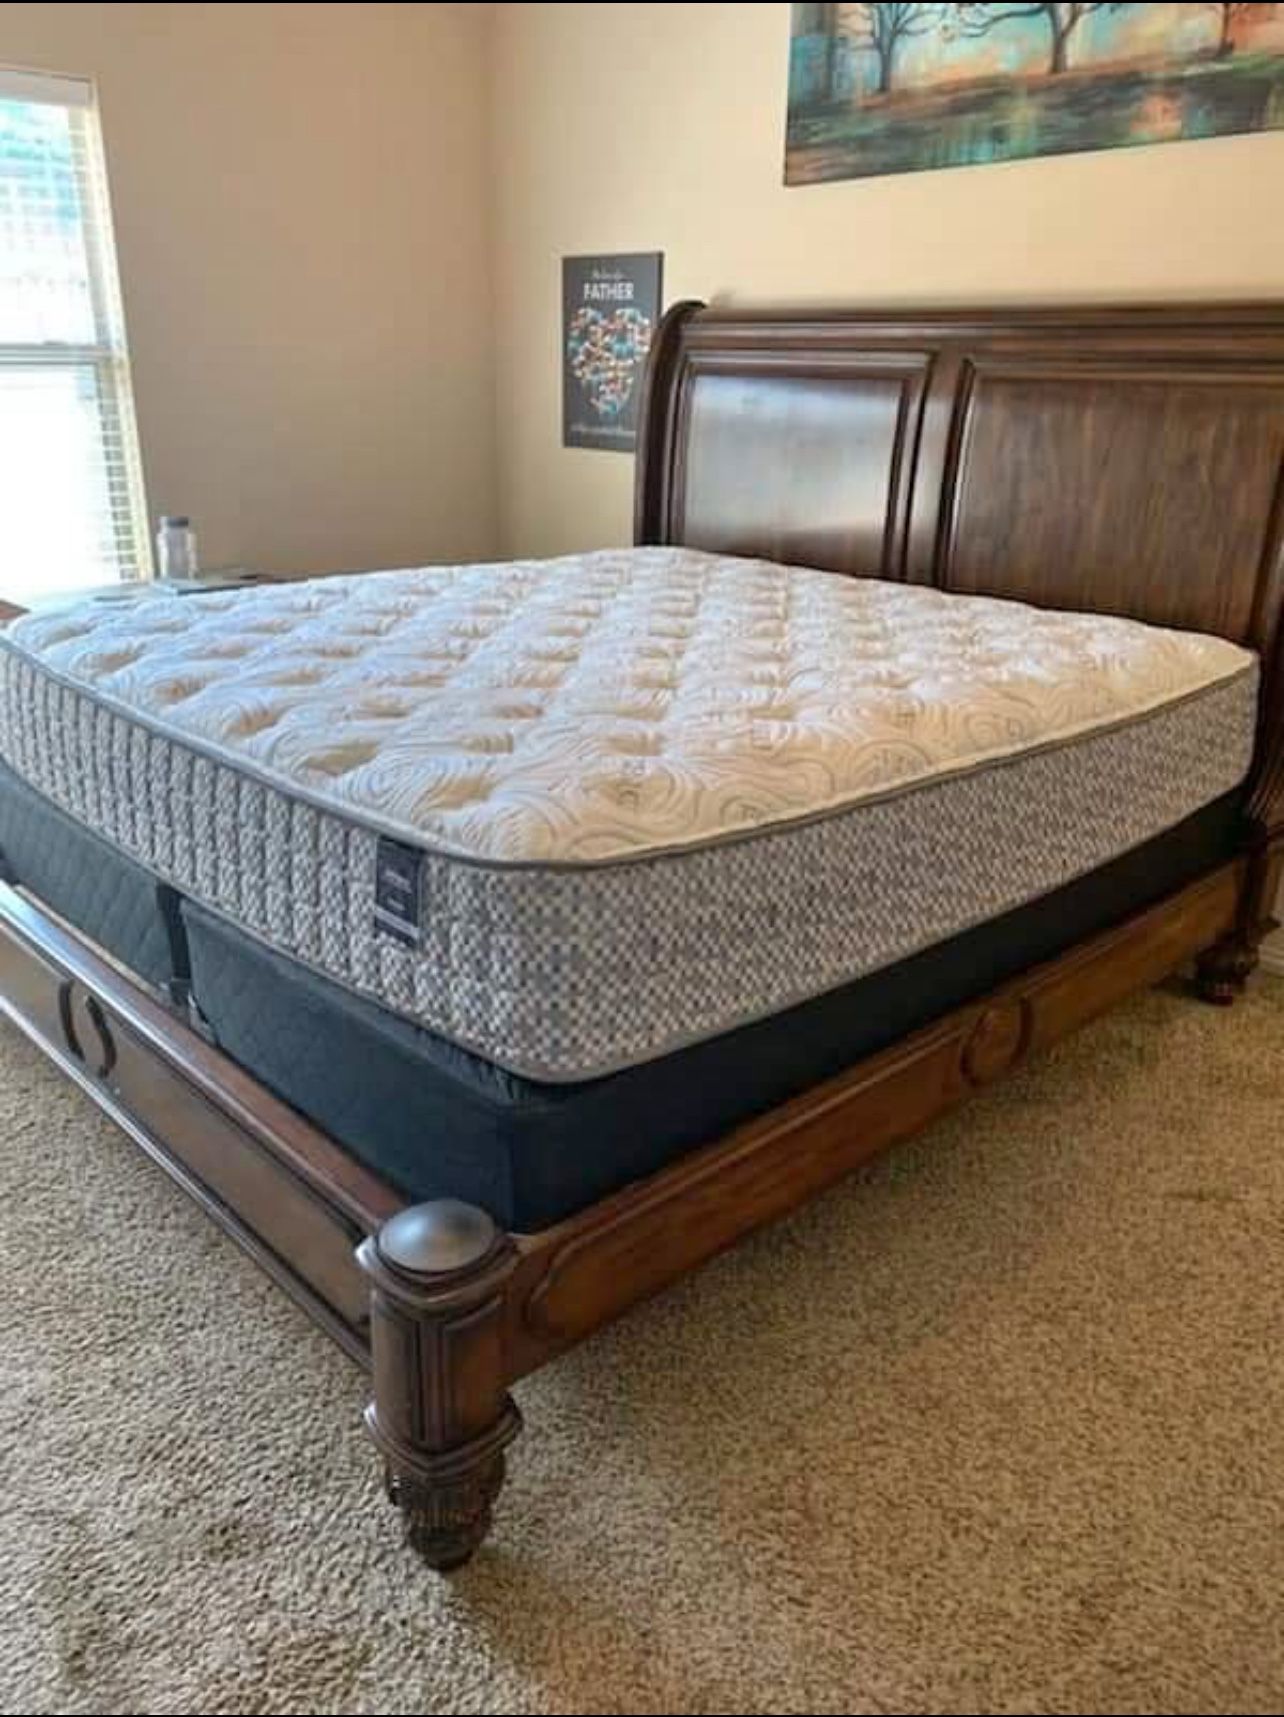 BRAND NEW MATTRESS SALE! 50% To 80% OFF RETAIL! $10 Down Takes It Home Today